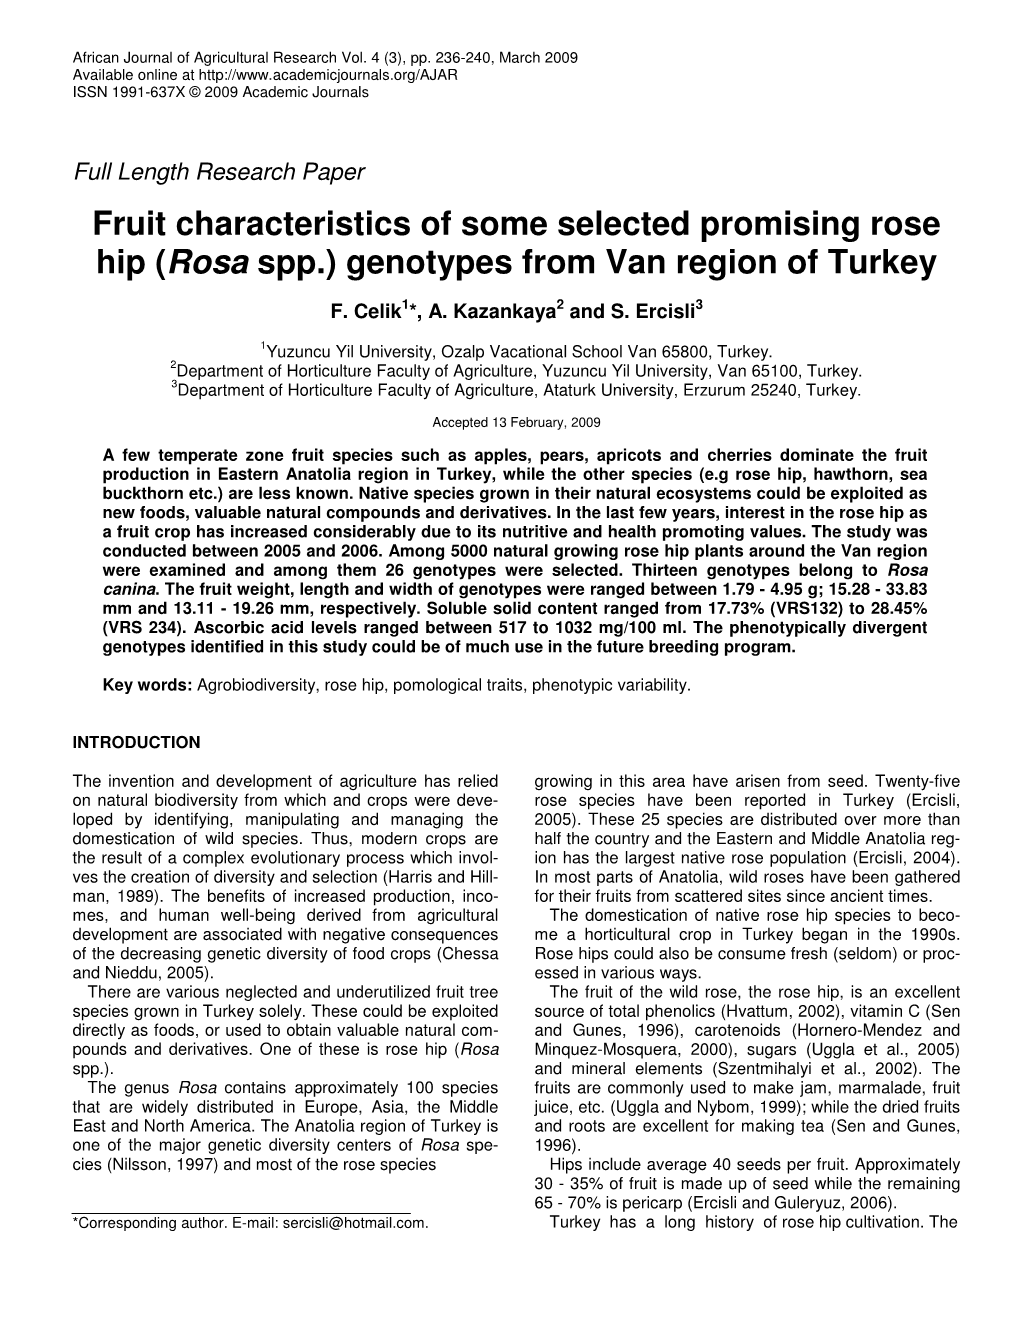 Fruit Characteristics of Some Selected Promising Rose Hip (Rosa Spp.) Genotypes from Van Region of Turkey